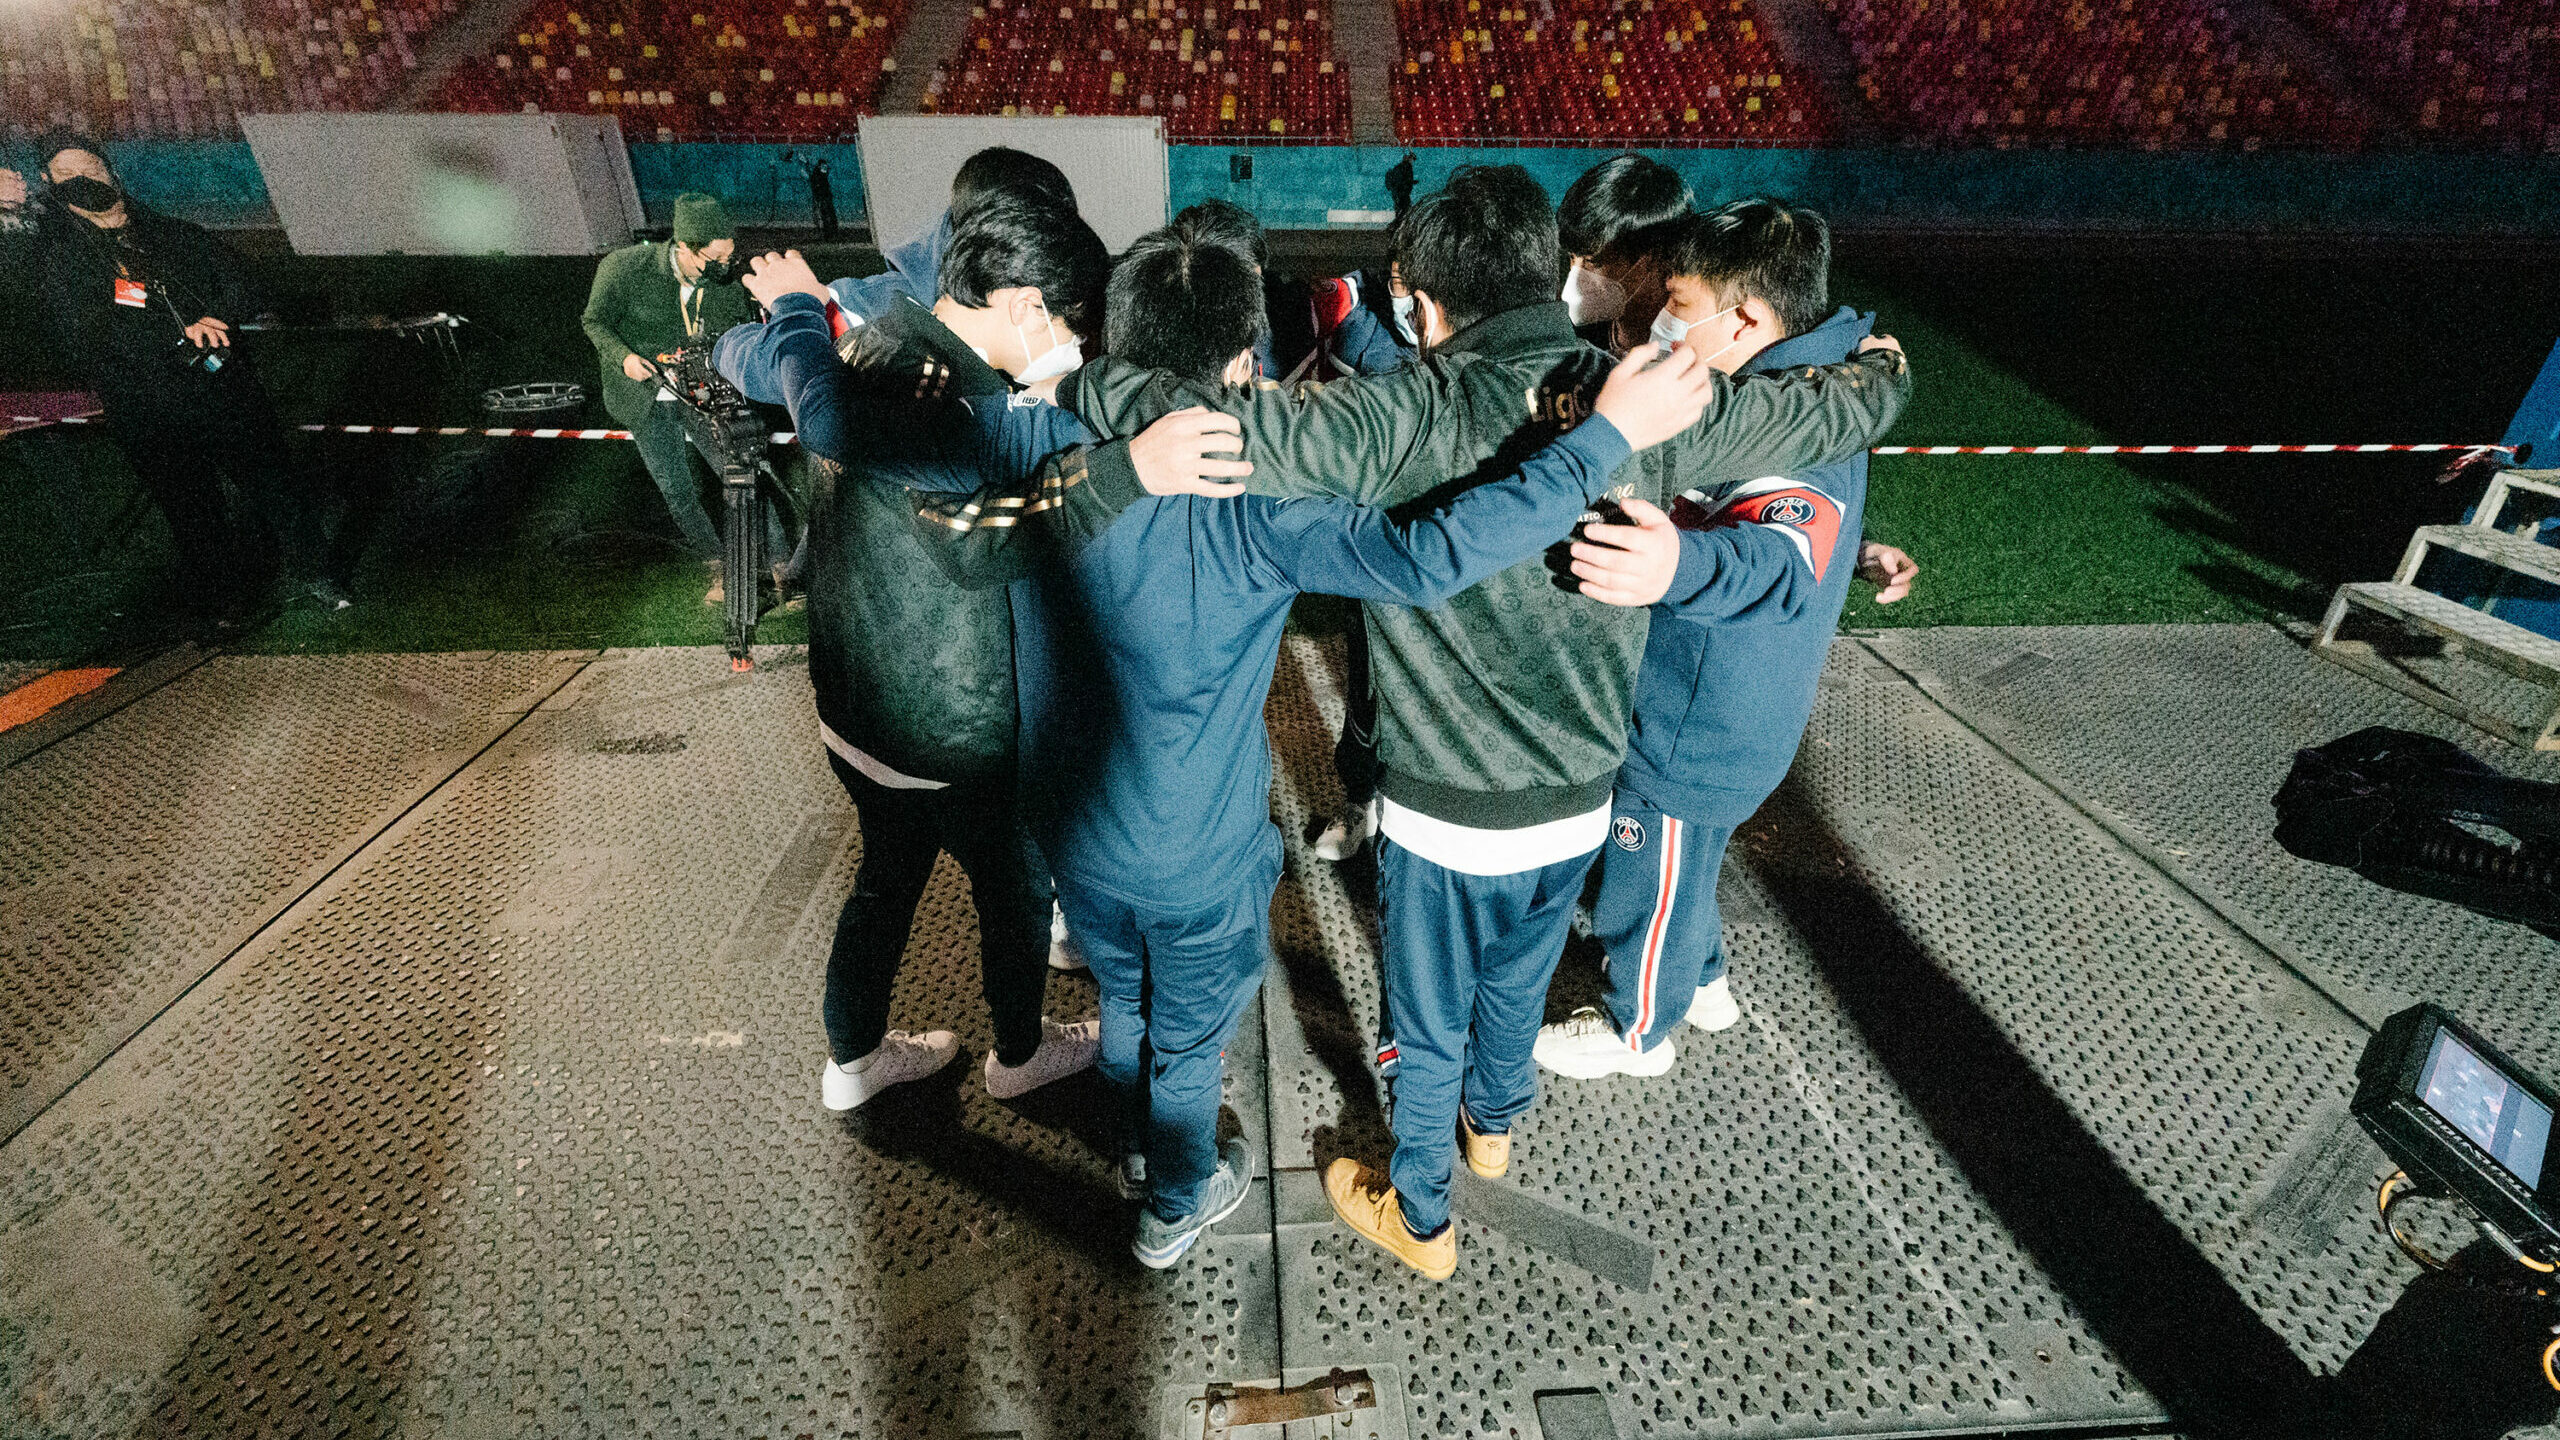 Featured image for “PSG.LGD eliminates beastcoast at TI11 in the lower bracket”